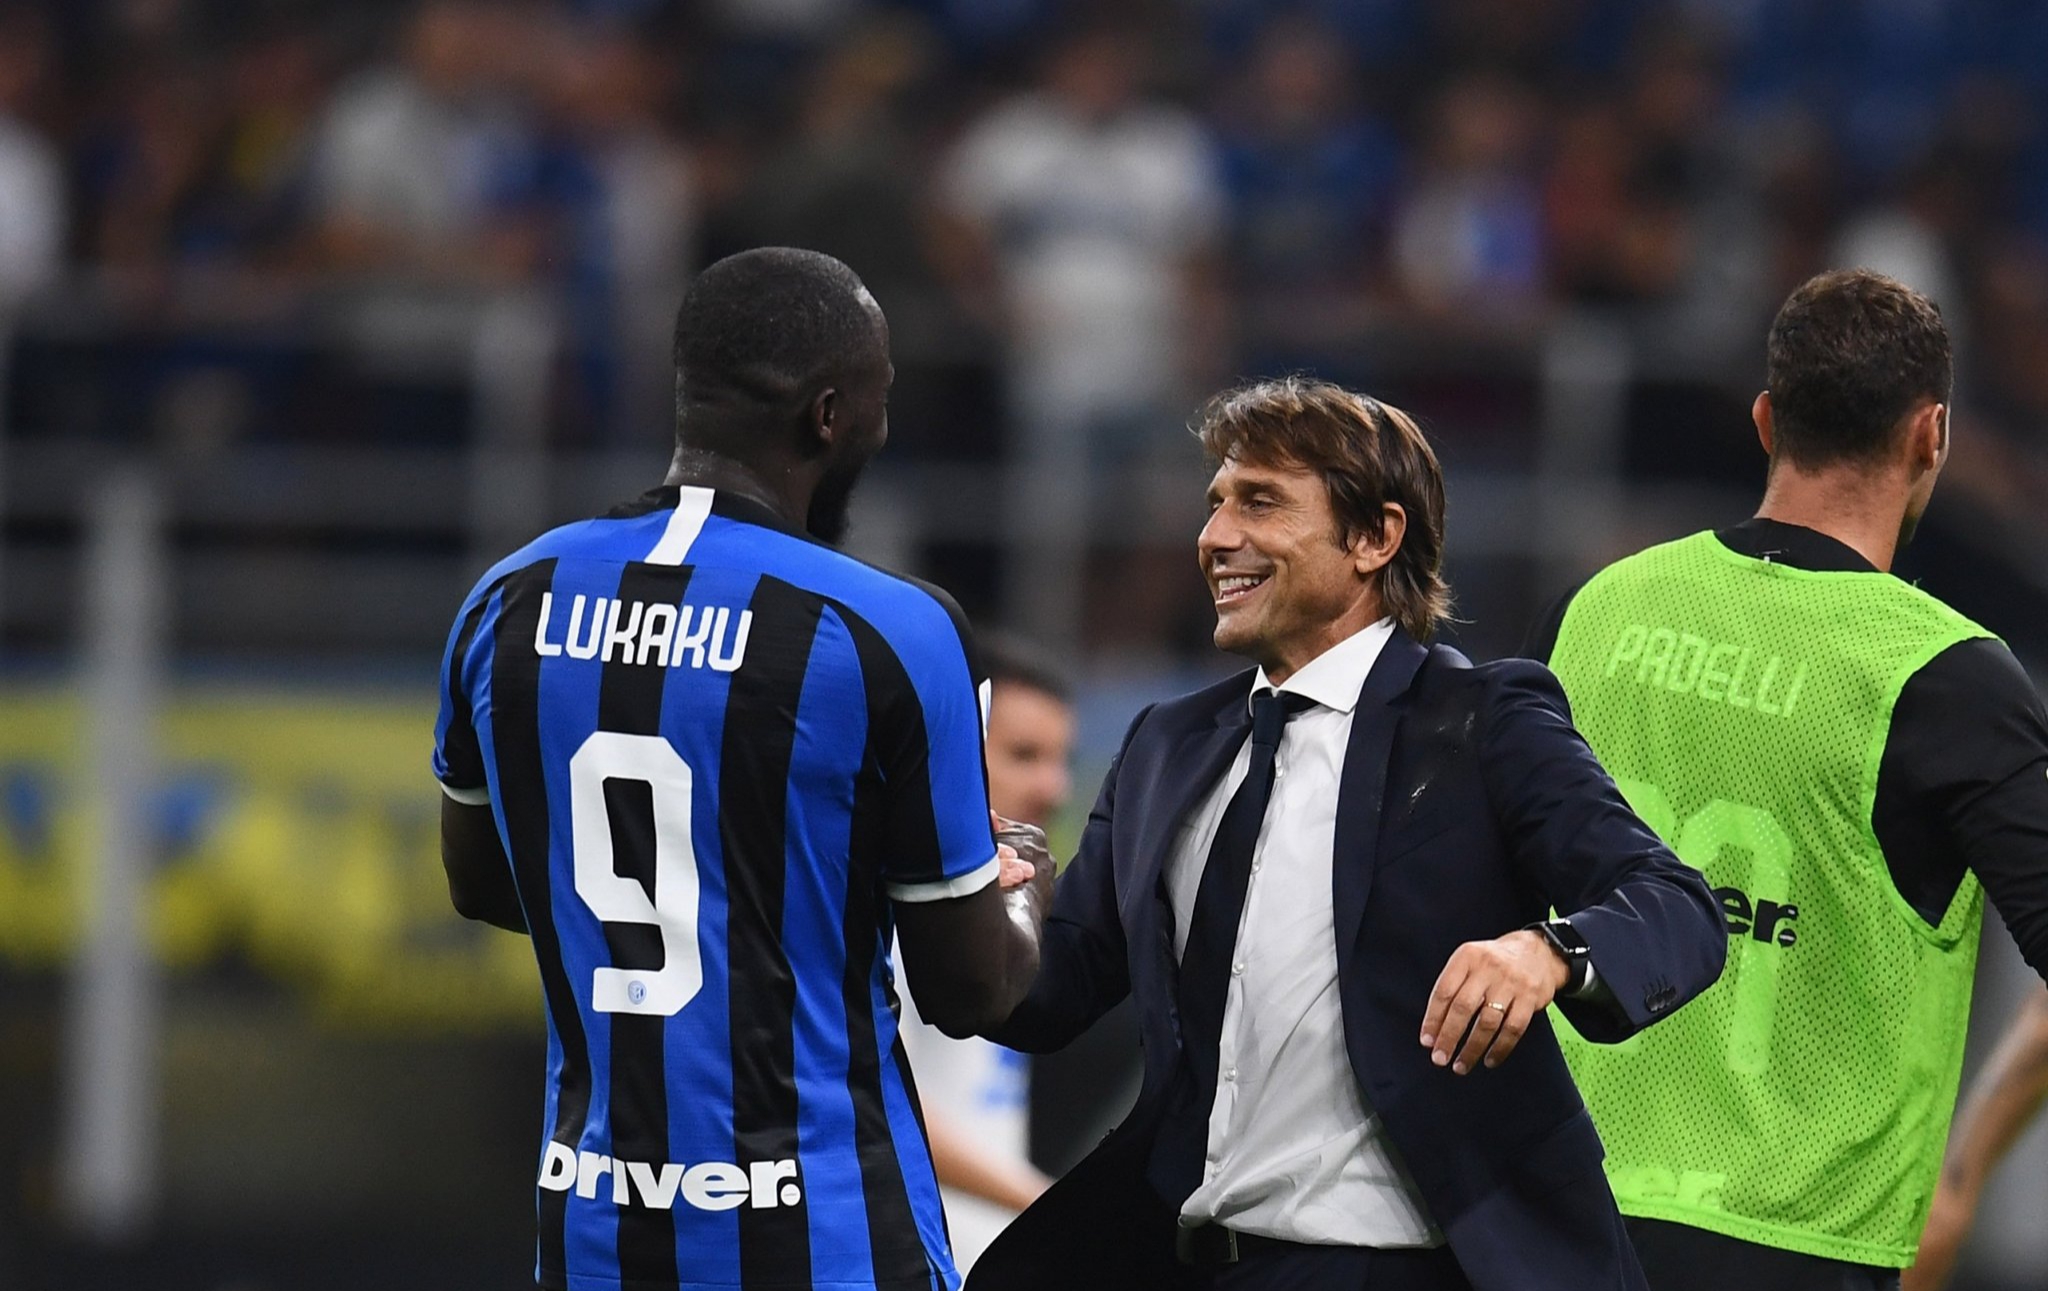 Conte insists Inter paid Man Utd far less than £73m reported for Romelu Lukaku